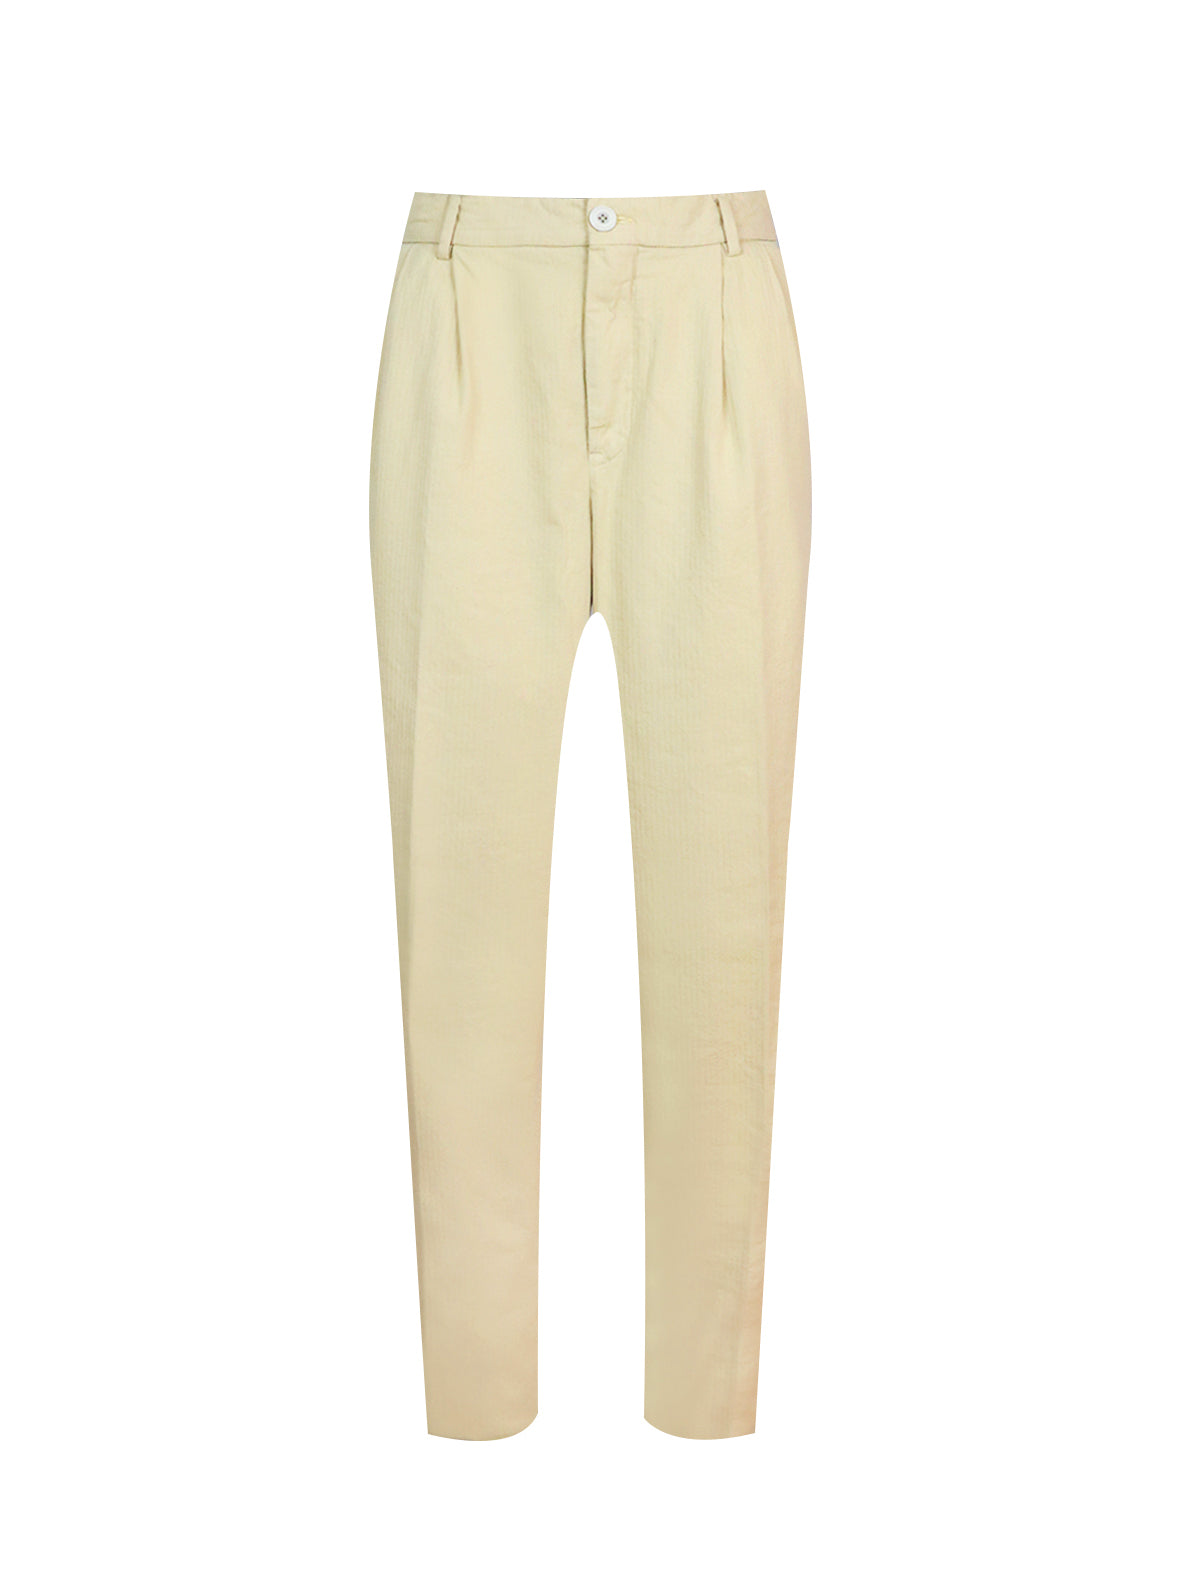 CARUSO Panarea Cotton Pants in Yellow